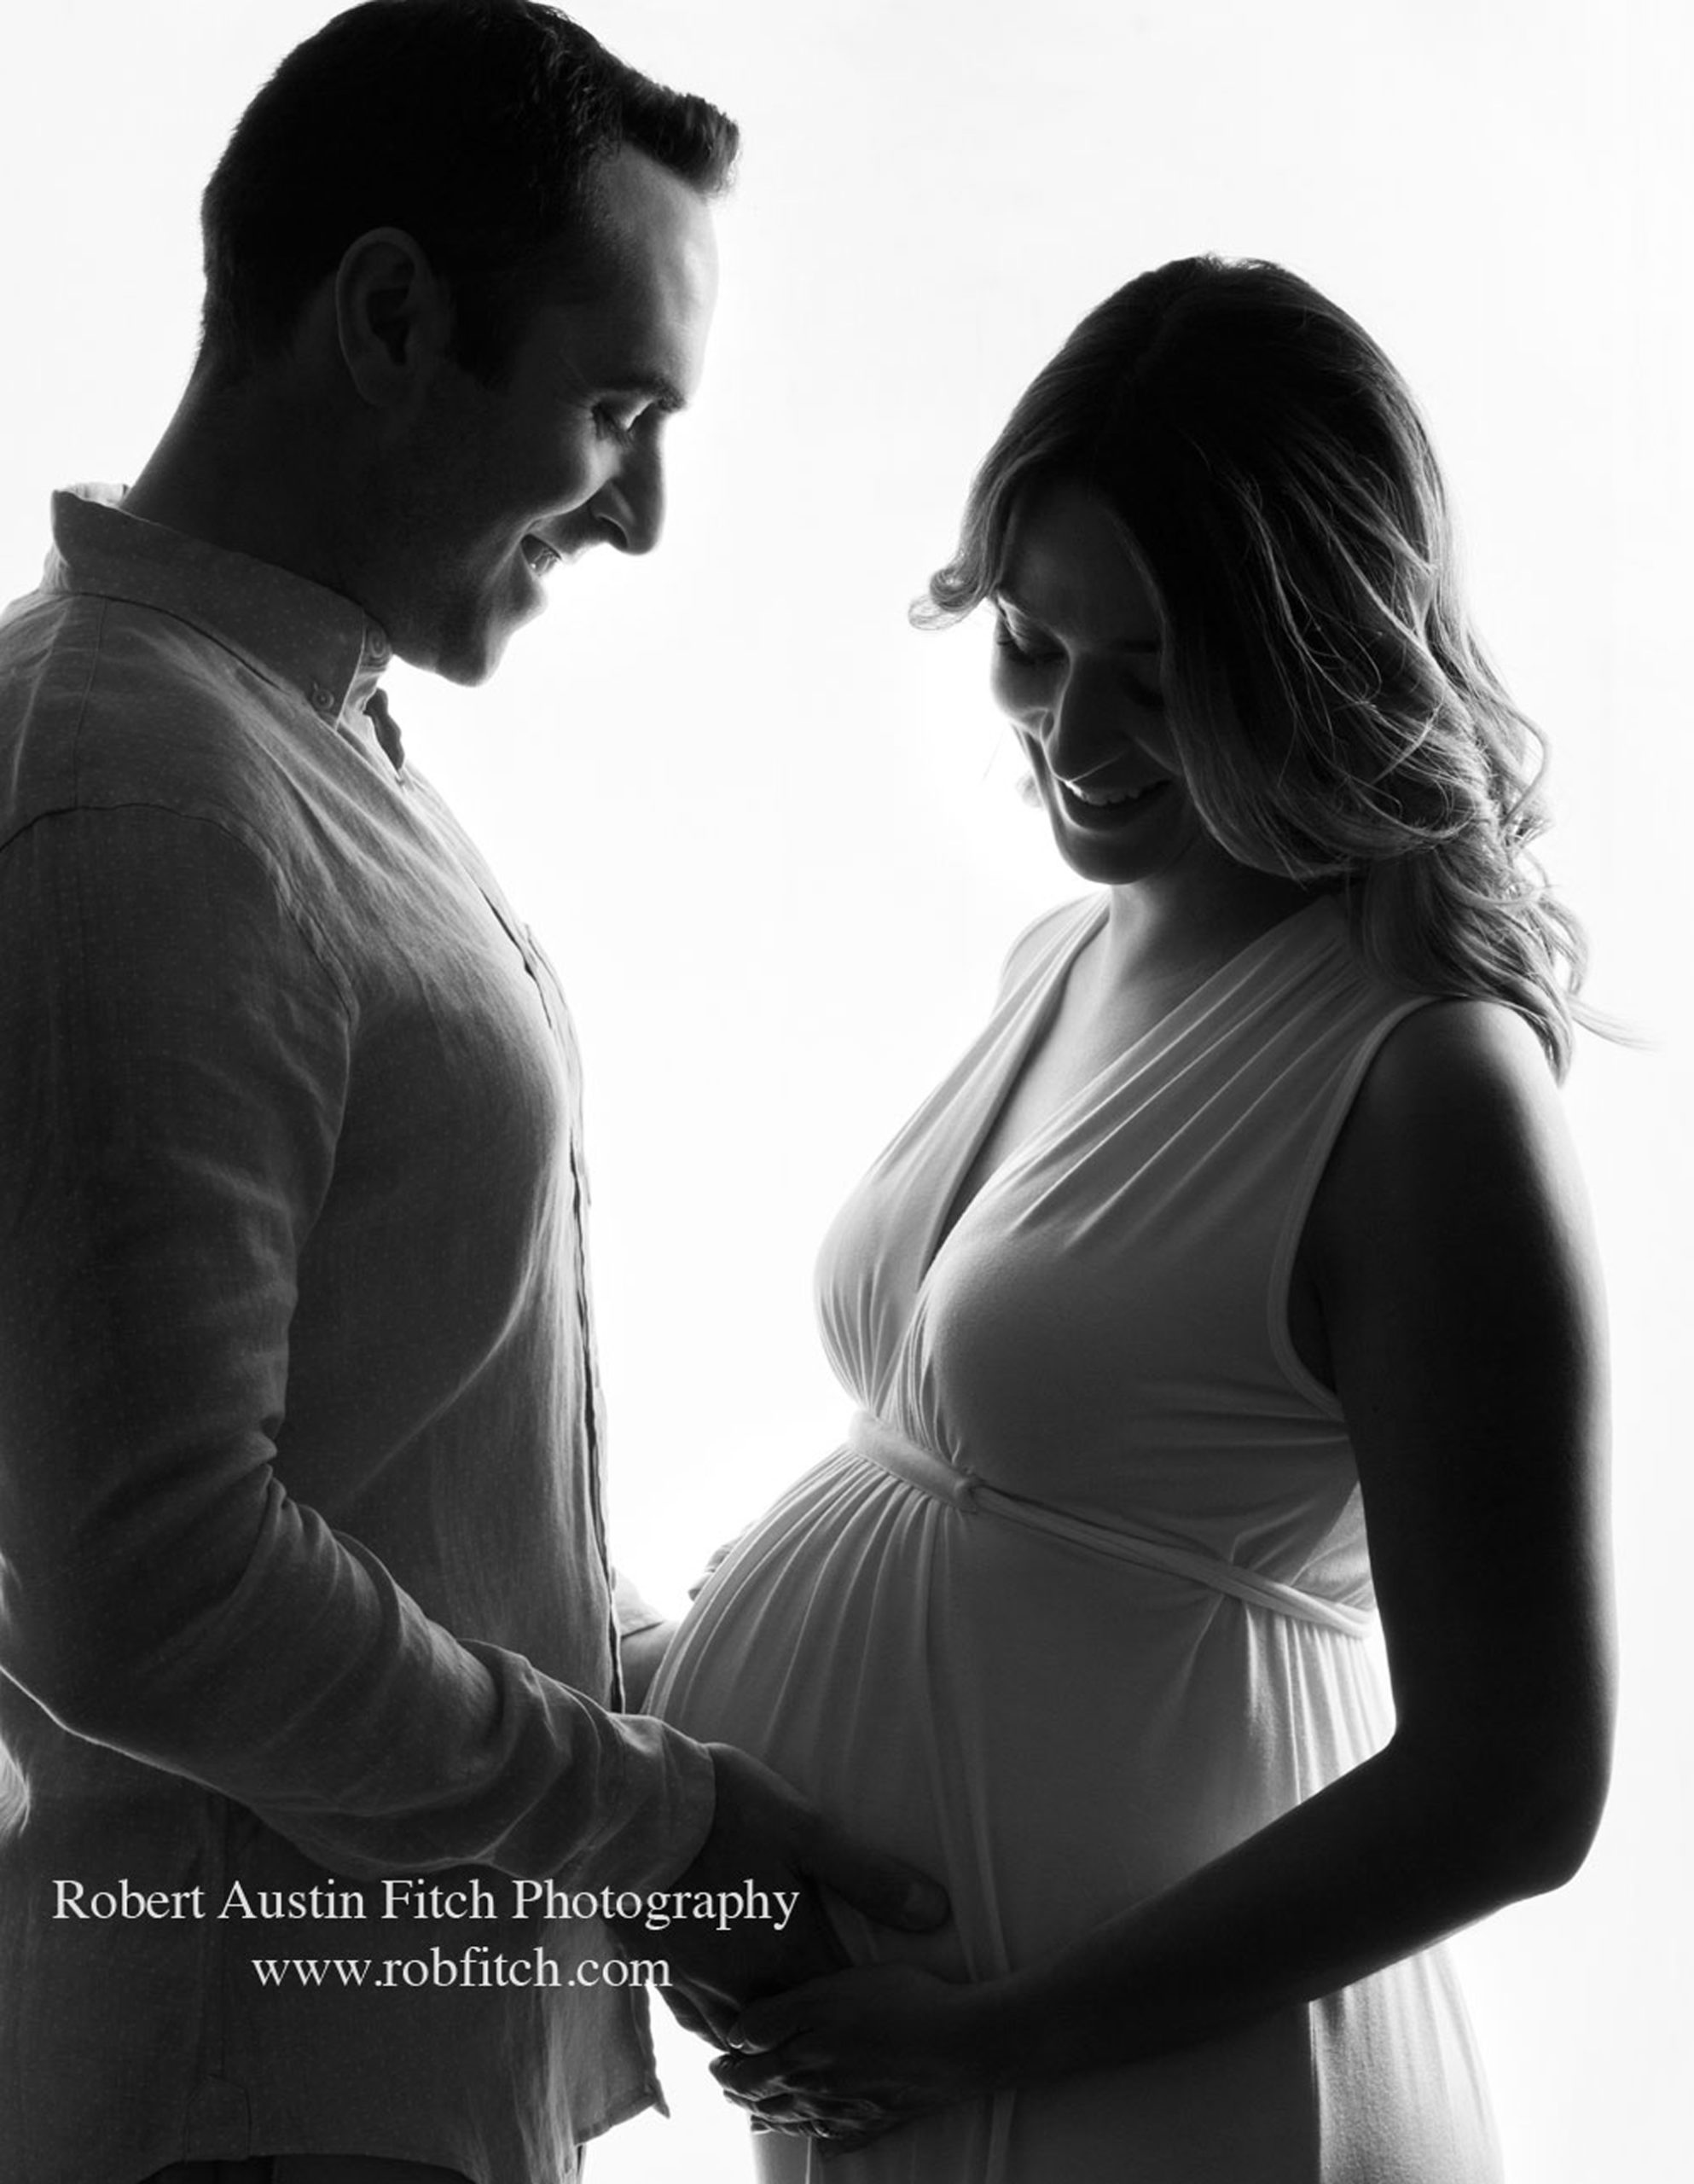 B&W artistic silhouette maternity photo of pregnant woman with her husband